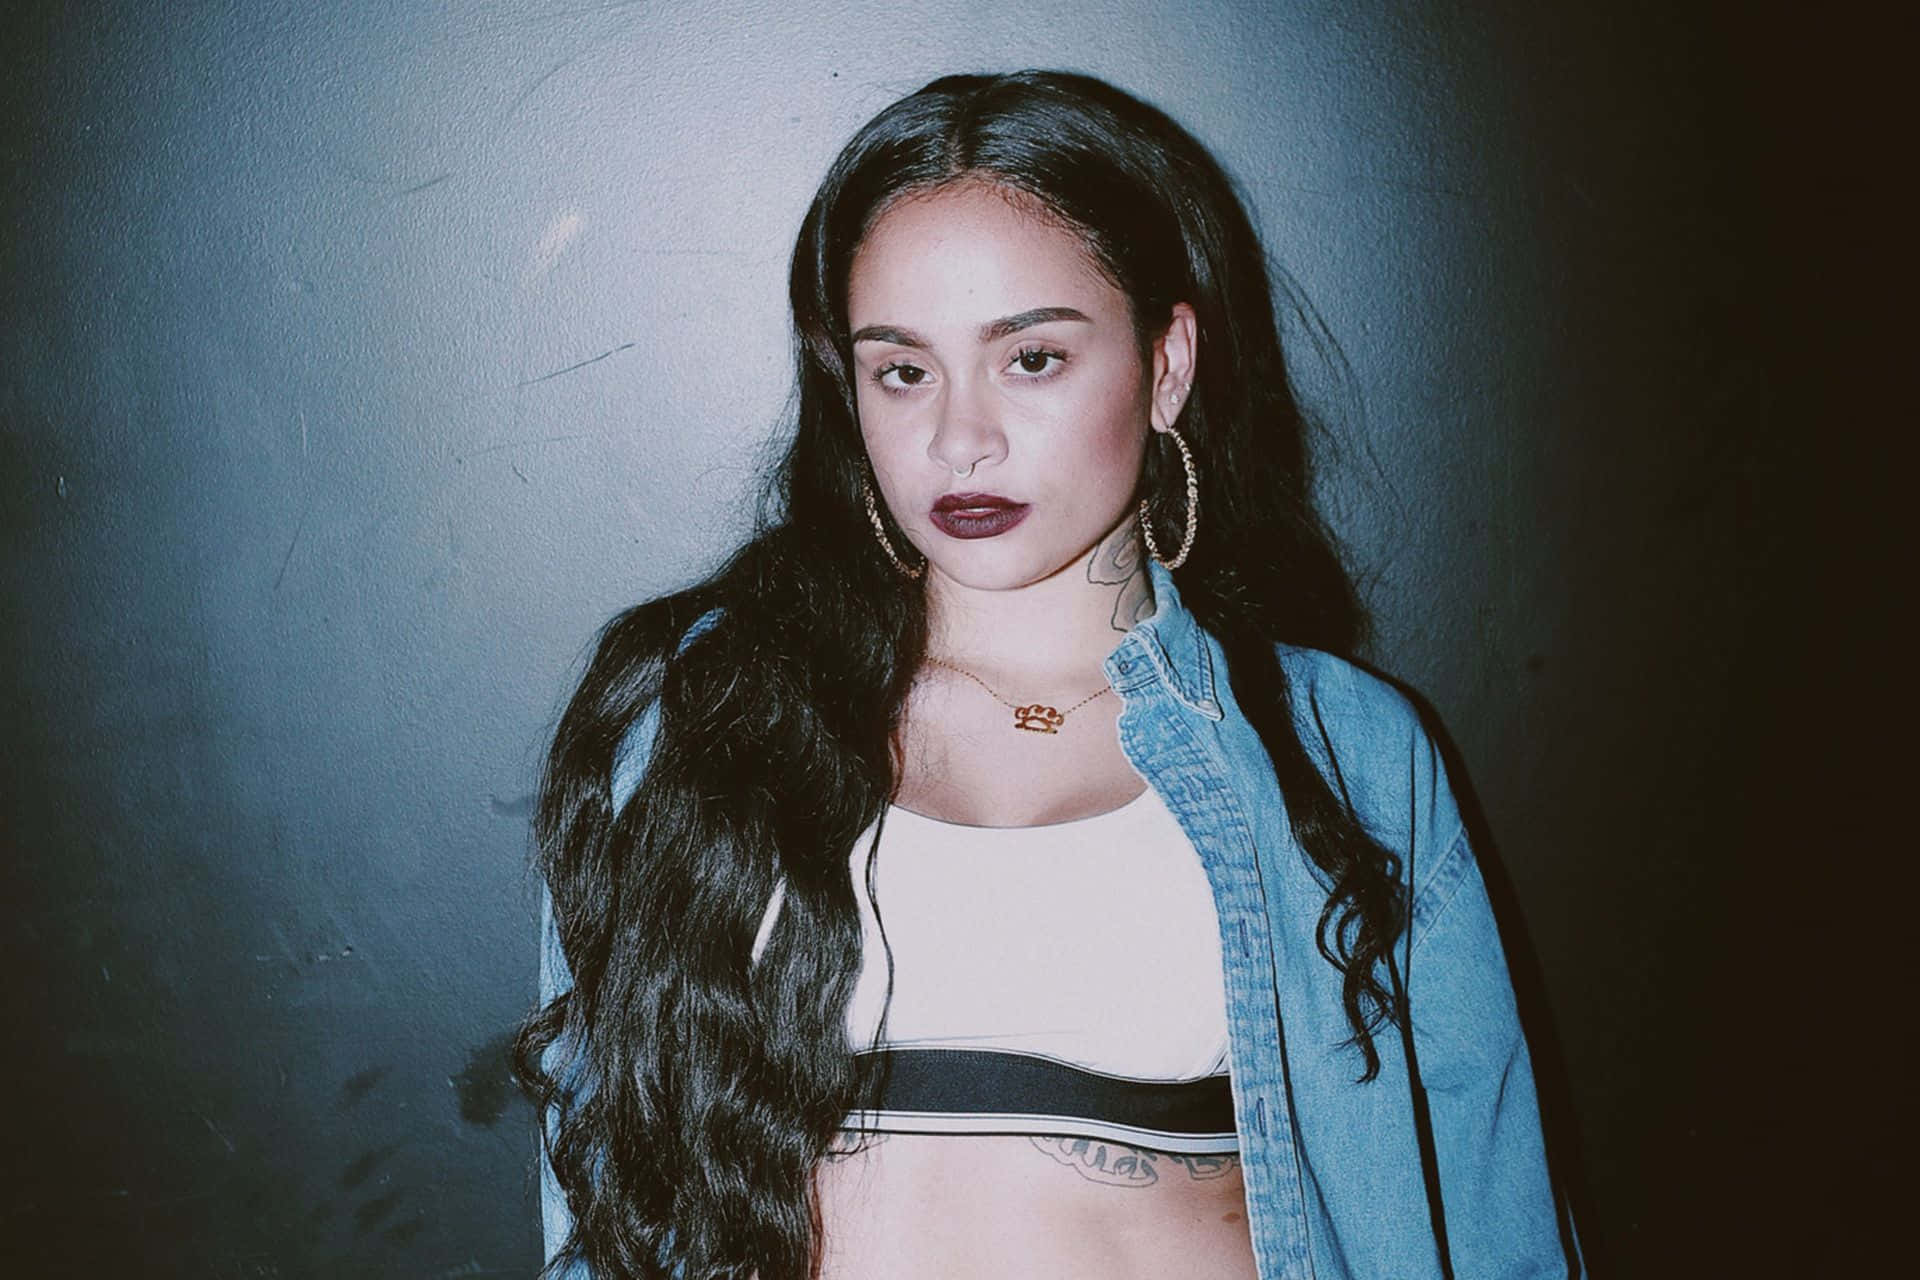 Singer And Songwriter Kehlani | Follow Your Passion